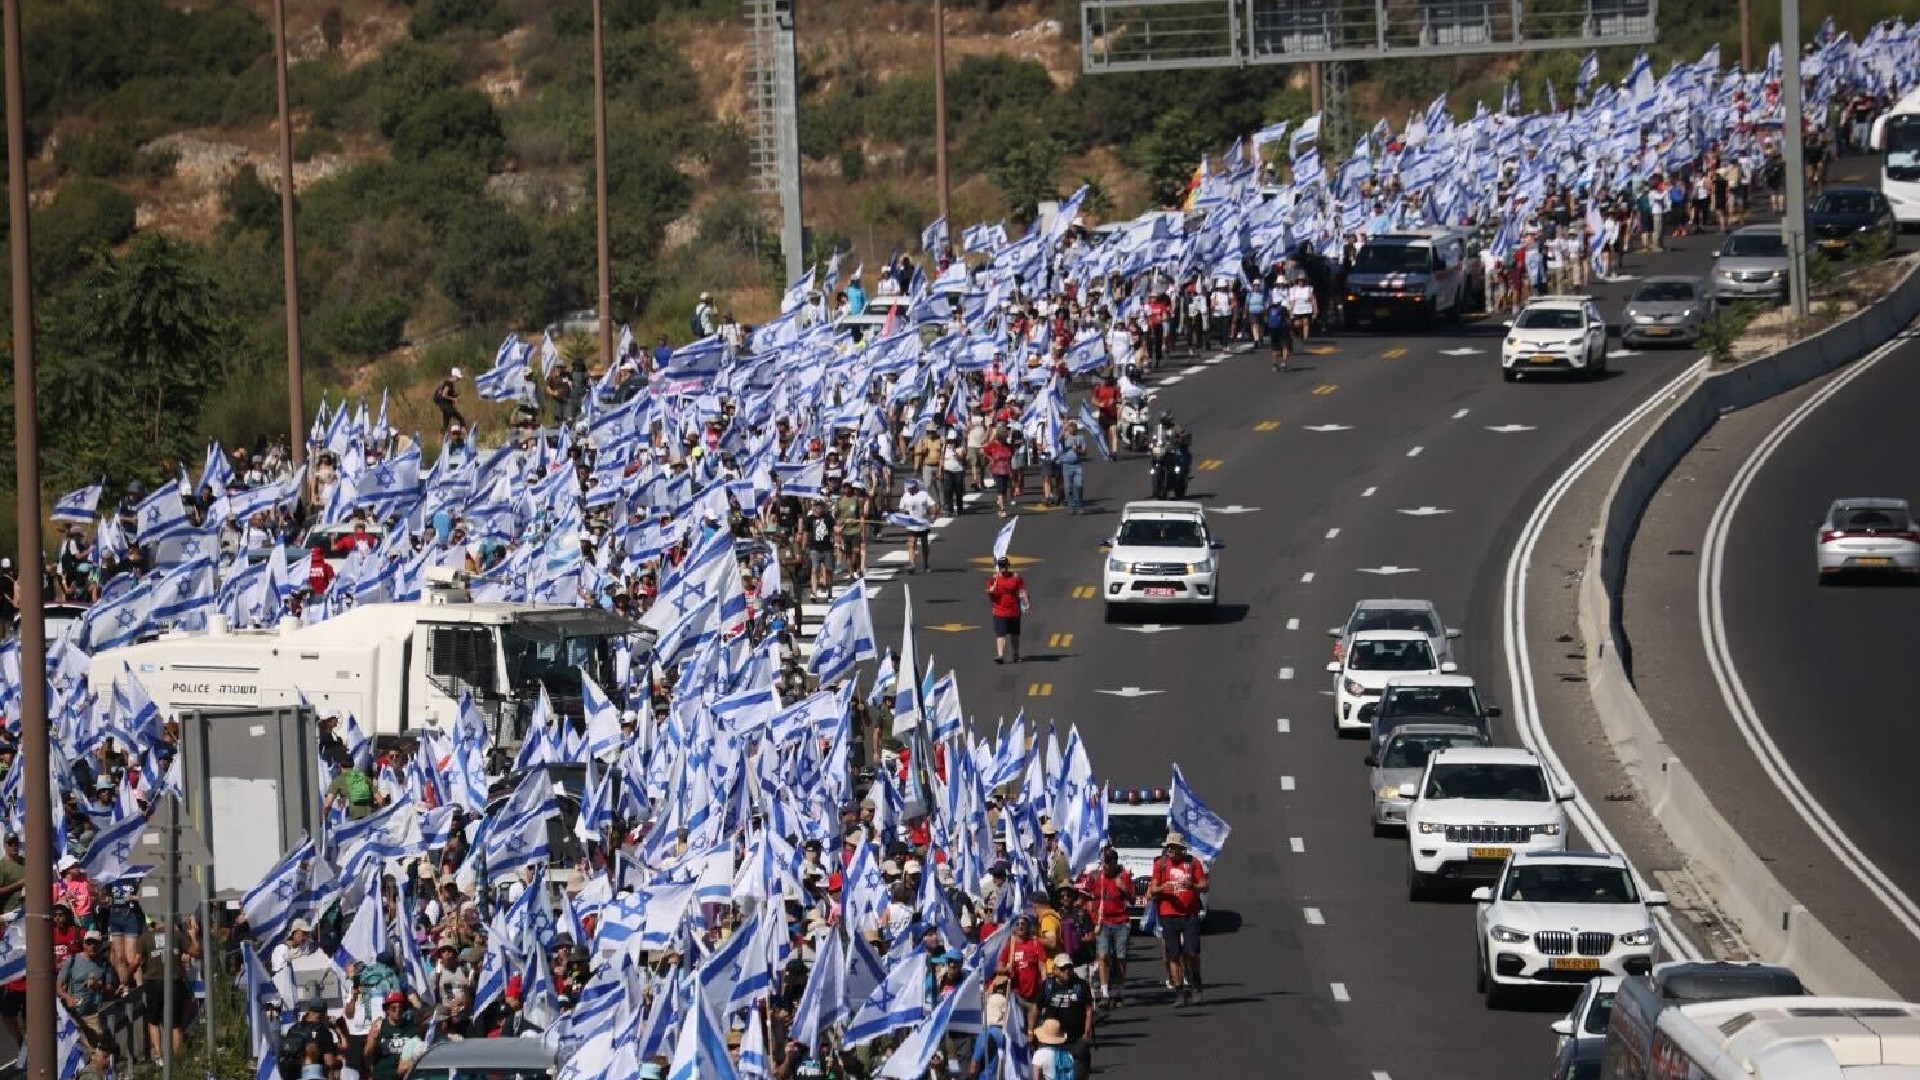 Tens of thousands of people joined the march from Tel Aviv to Jerusalem (MEE/Oren Ziv)